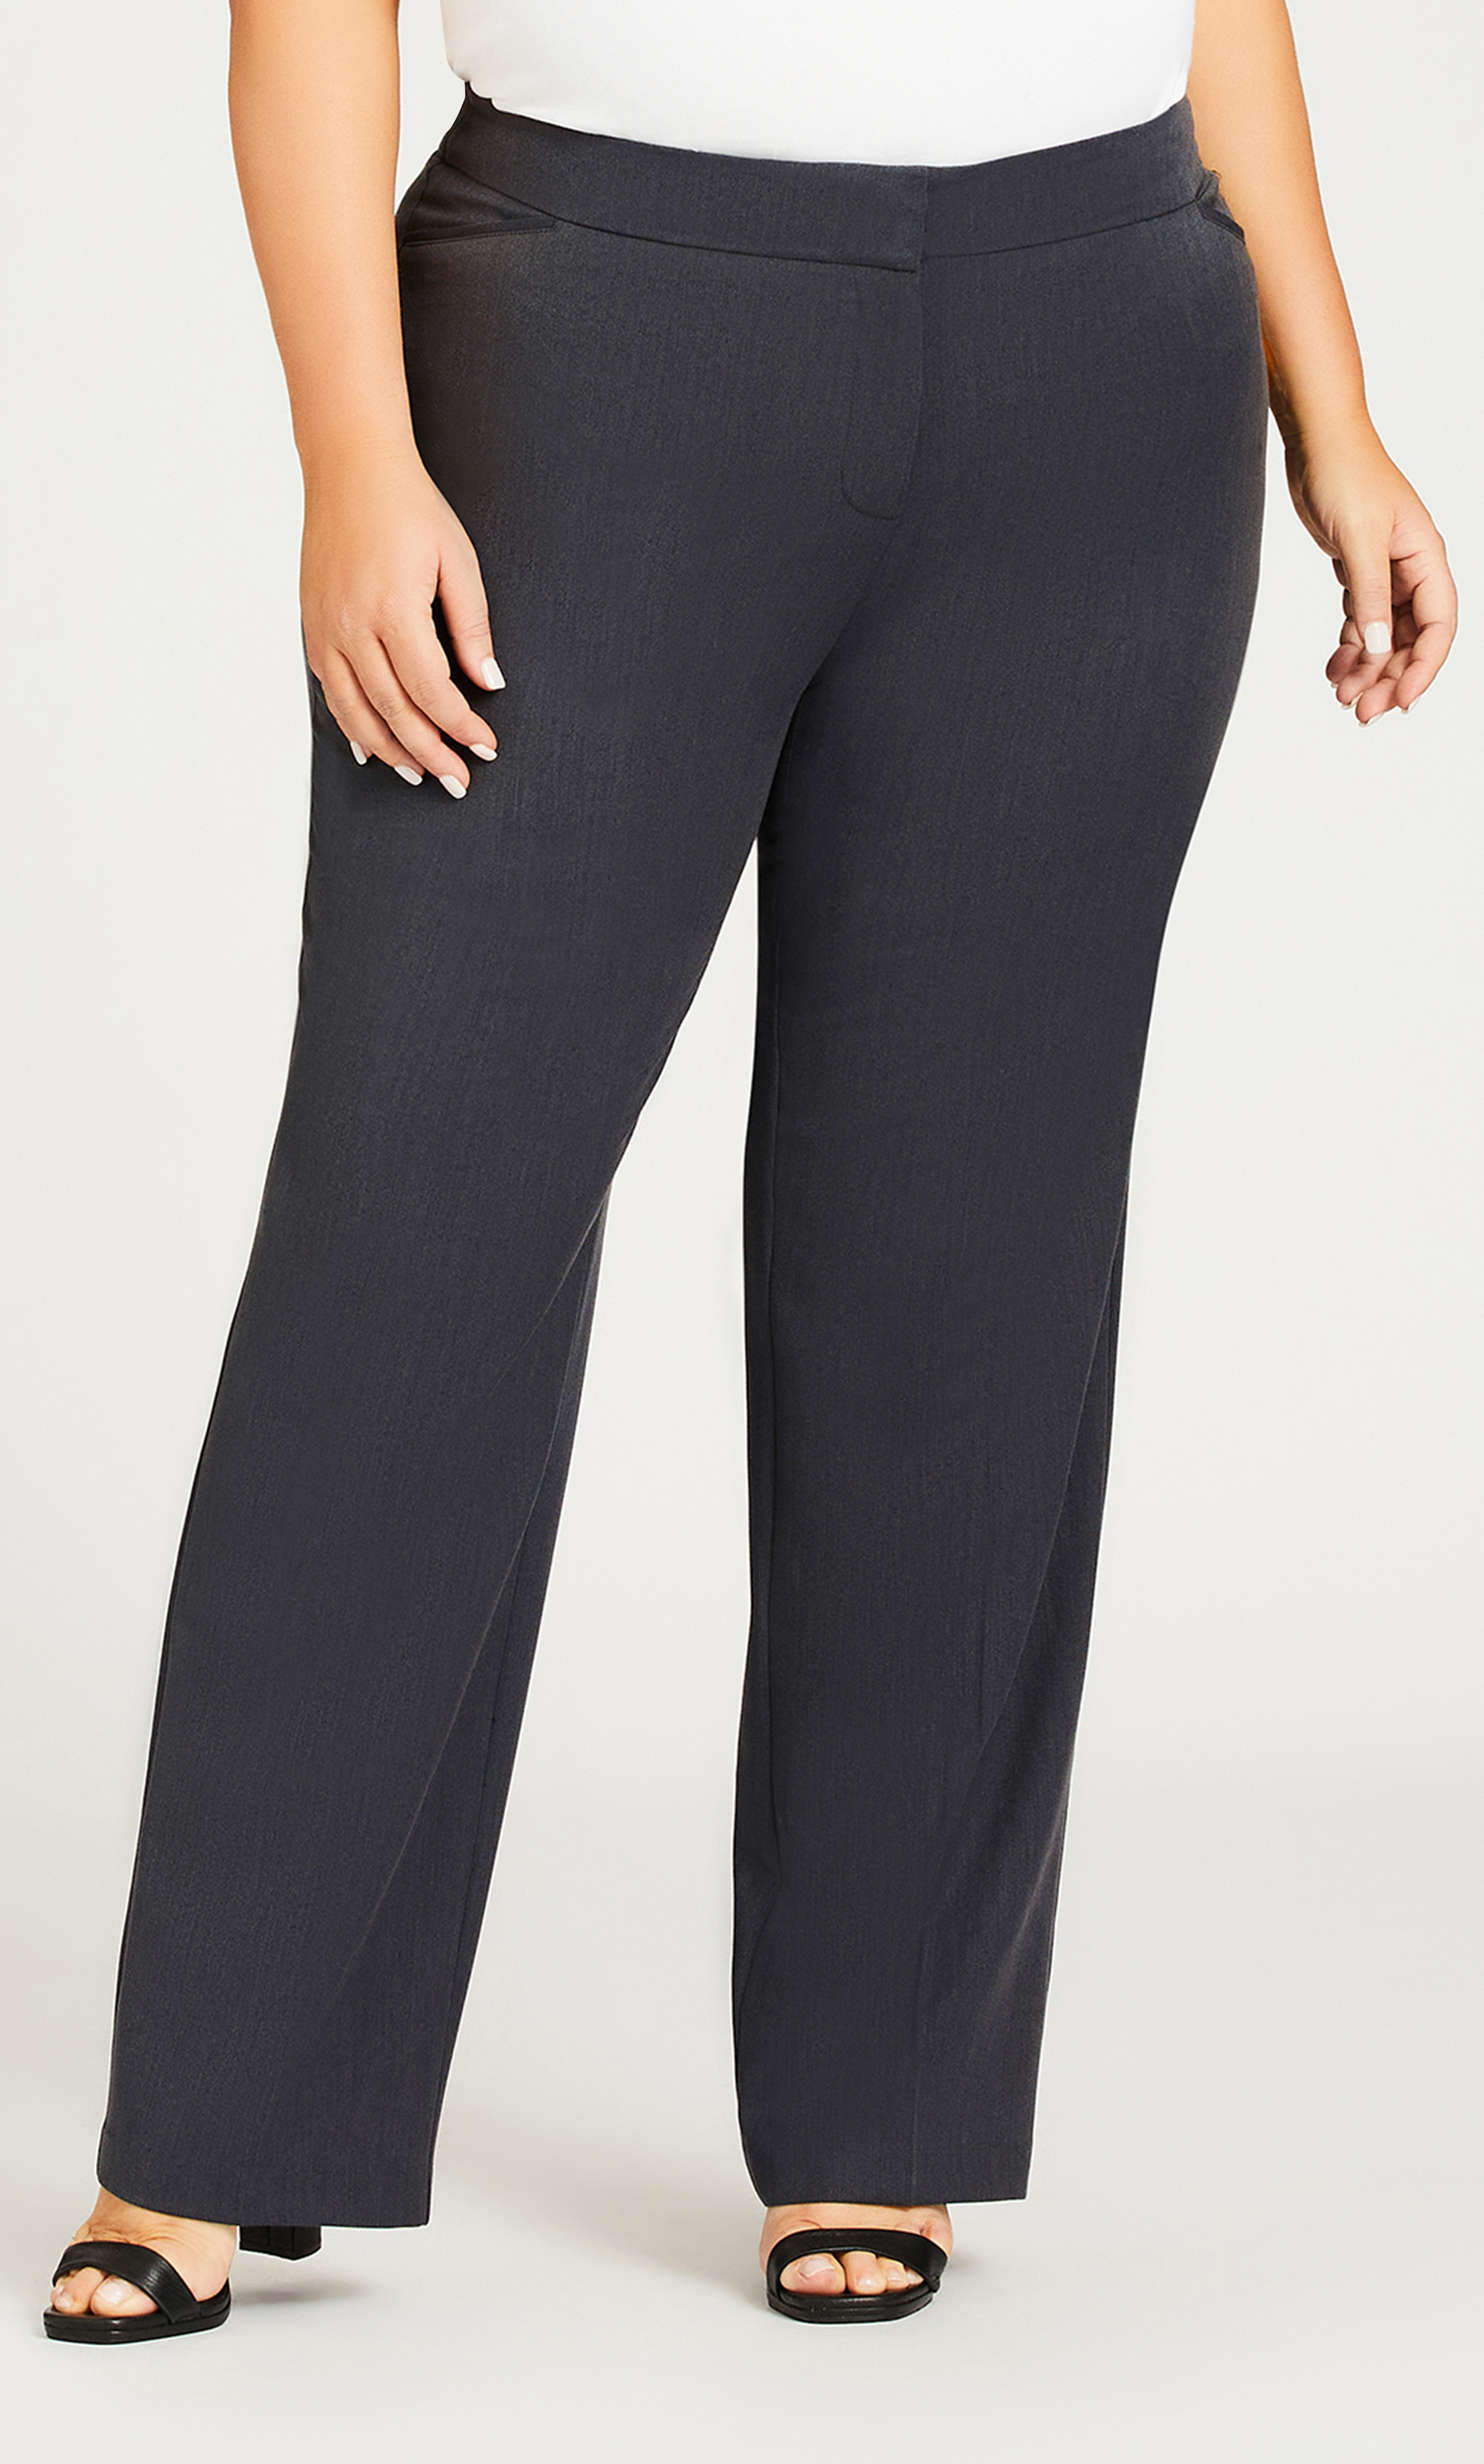 Plus Size Plus Size Cool Hand Stretch Tall Fit Charcoal Gray Trouser Pants